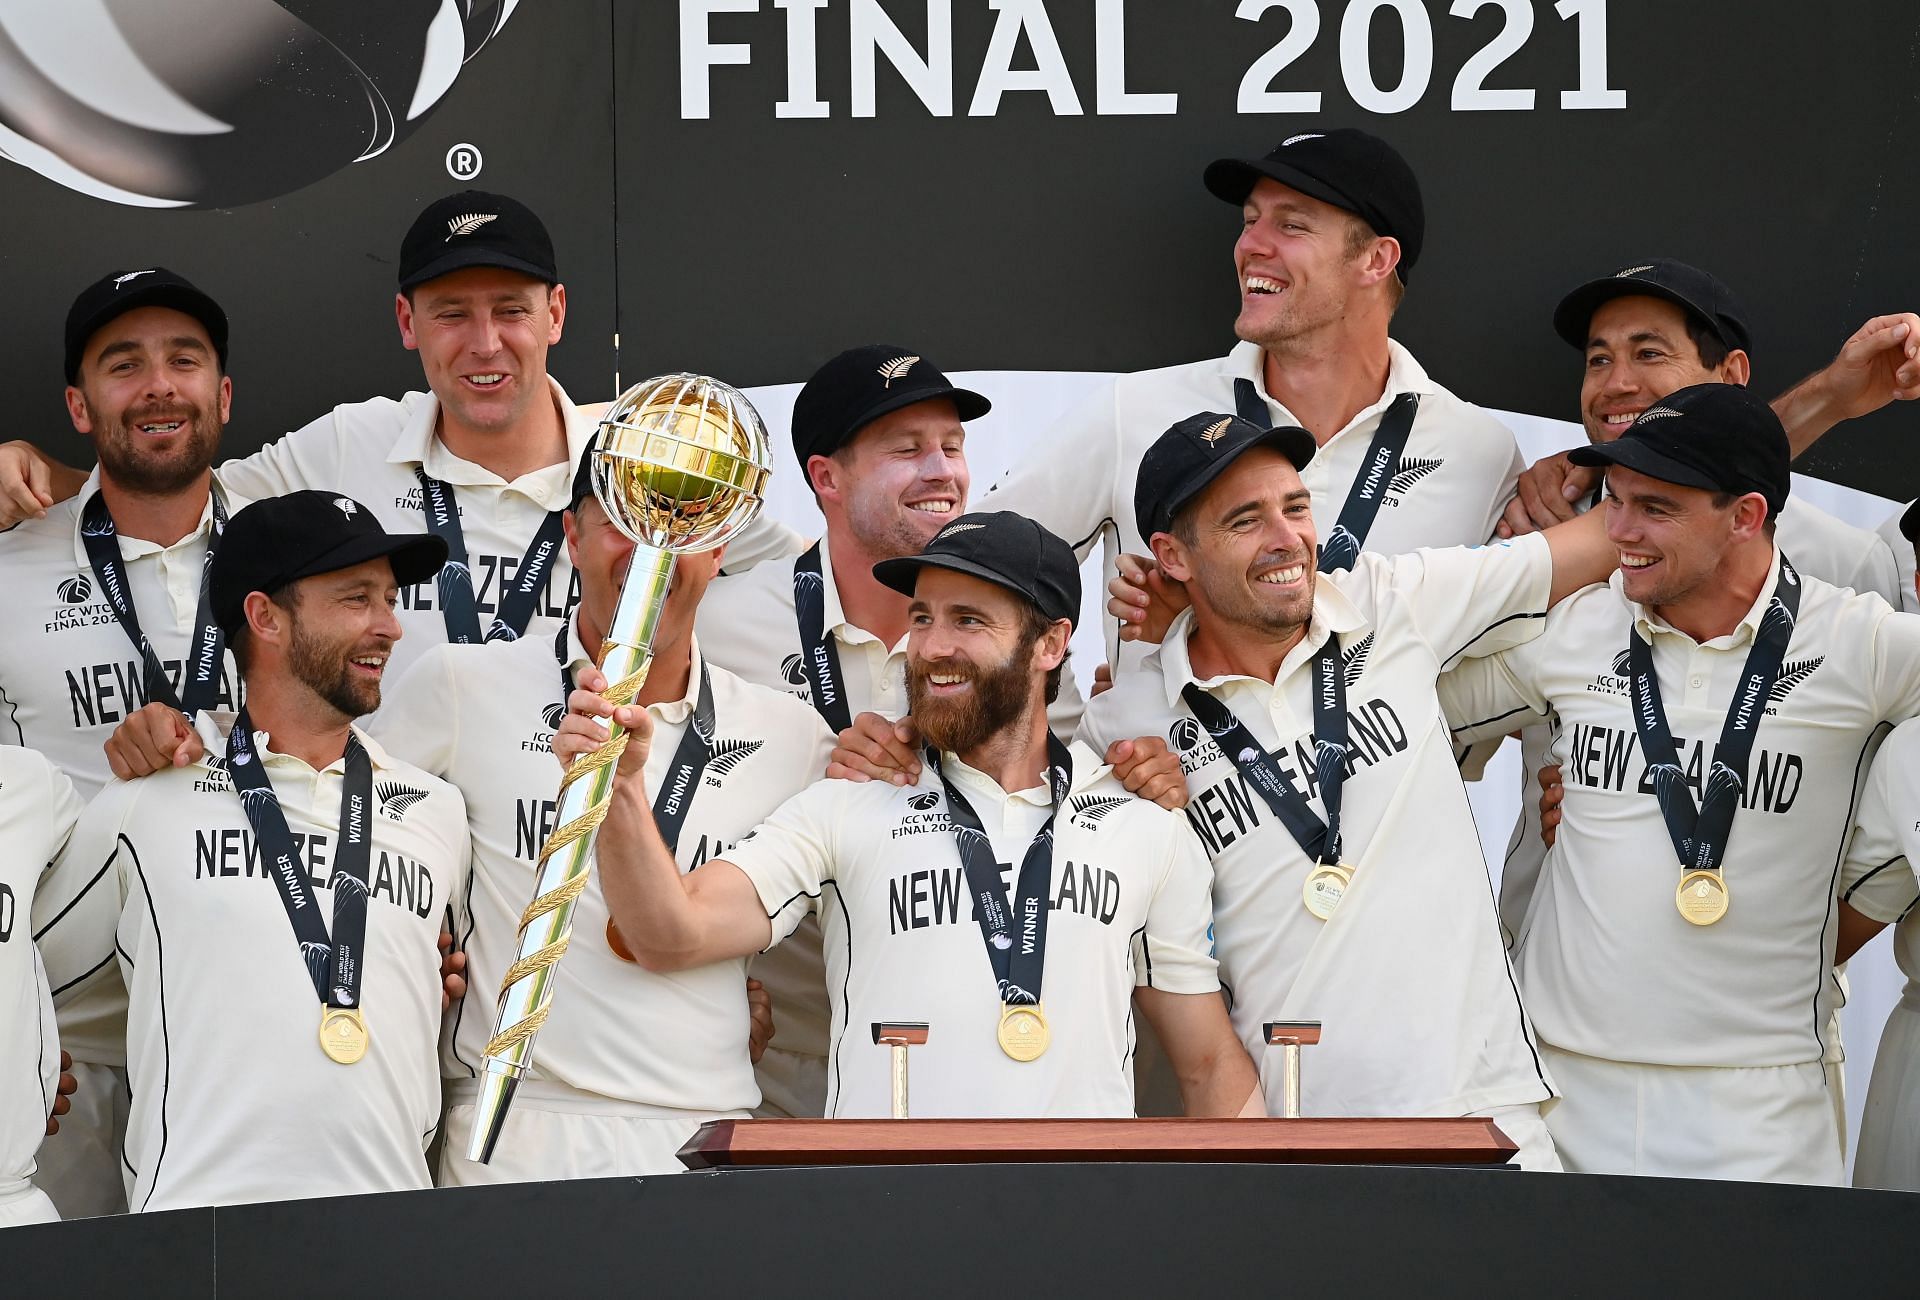 Kane Williamson celebrates with the WTC mace. (Credits: Getty)